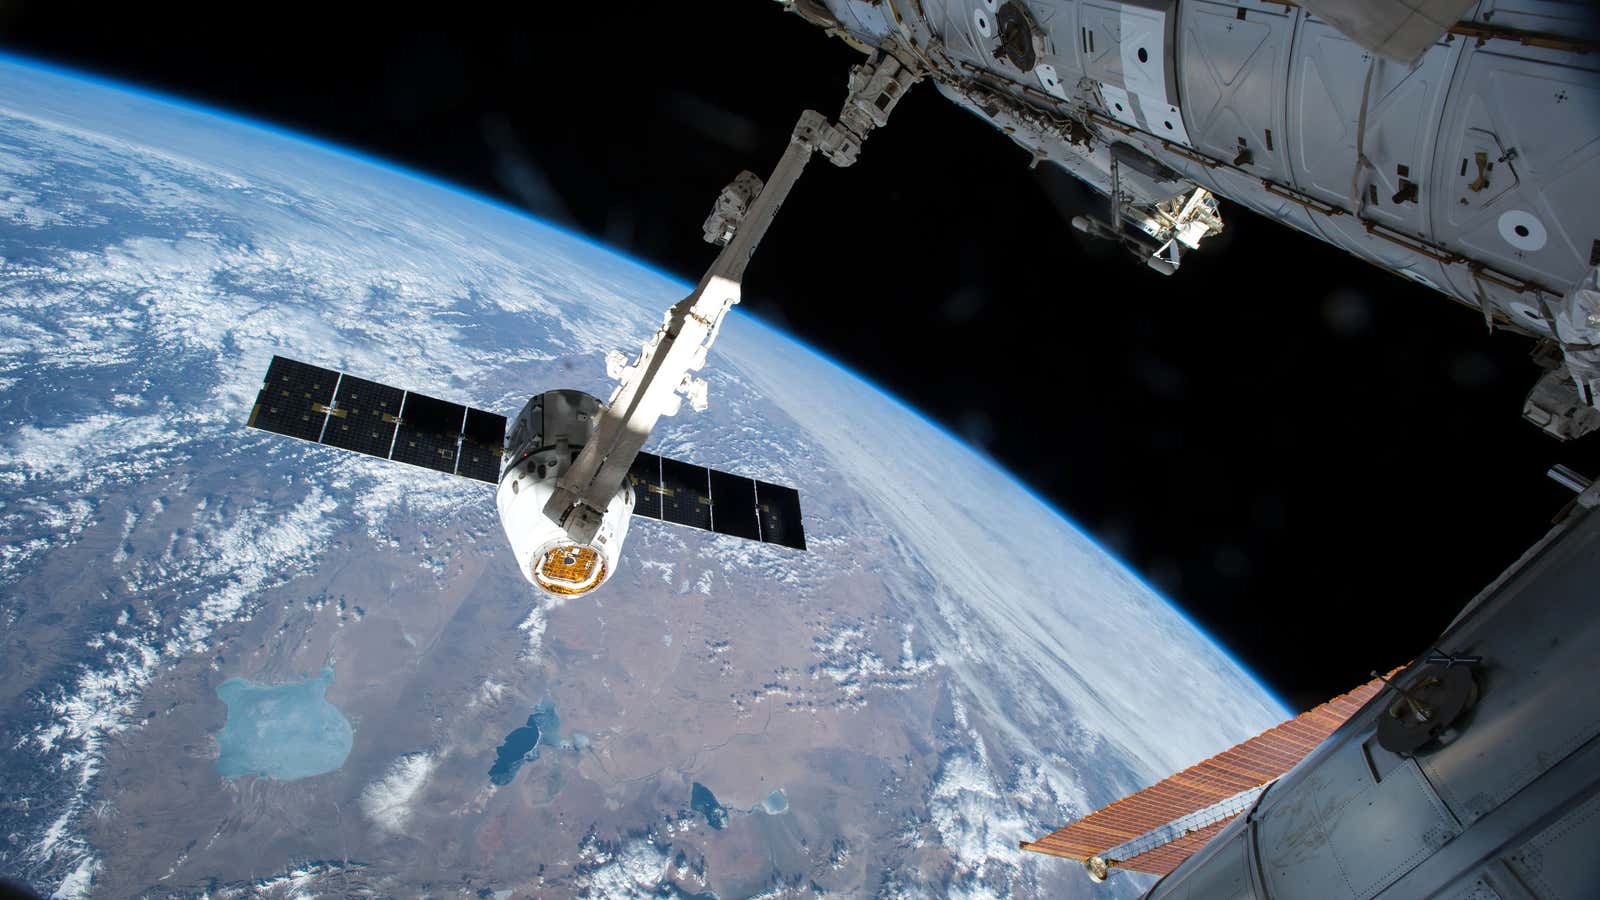 A SpaceX spacecraft brings a load of cargo to the International Space Station in 2015.